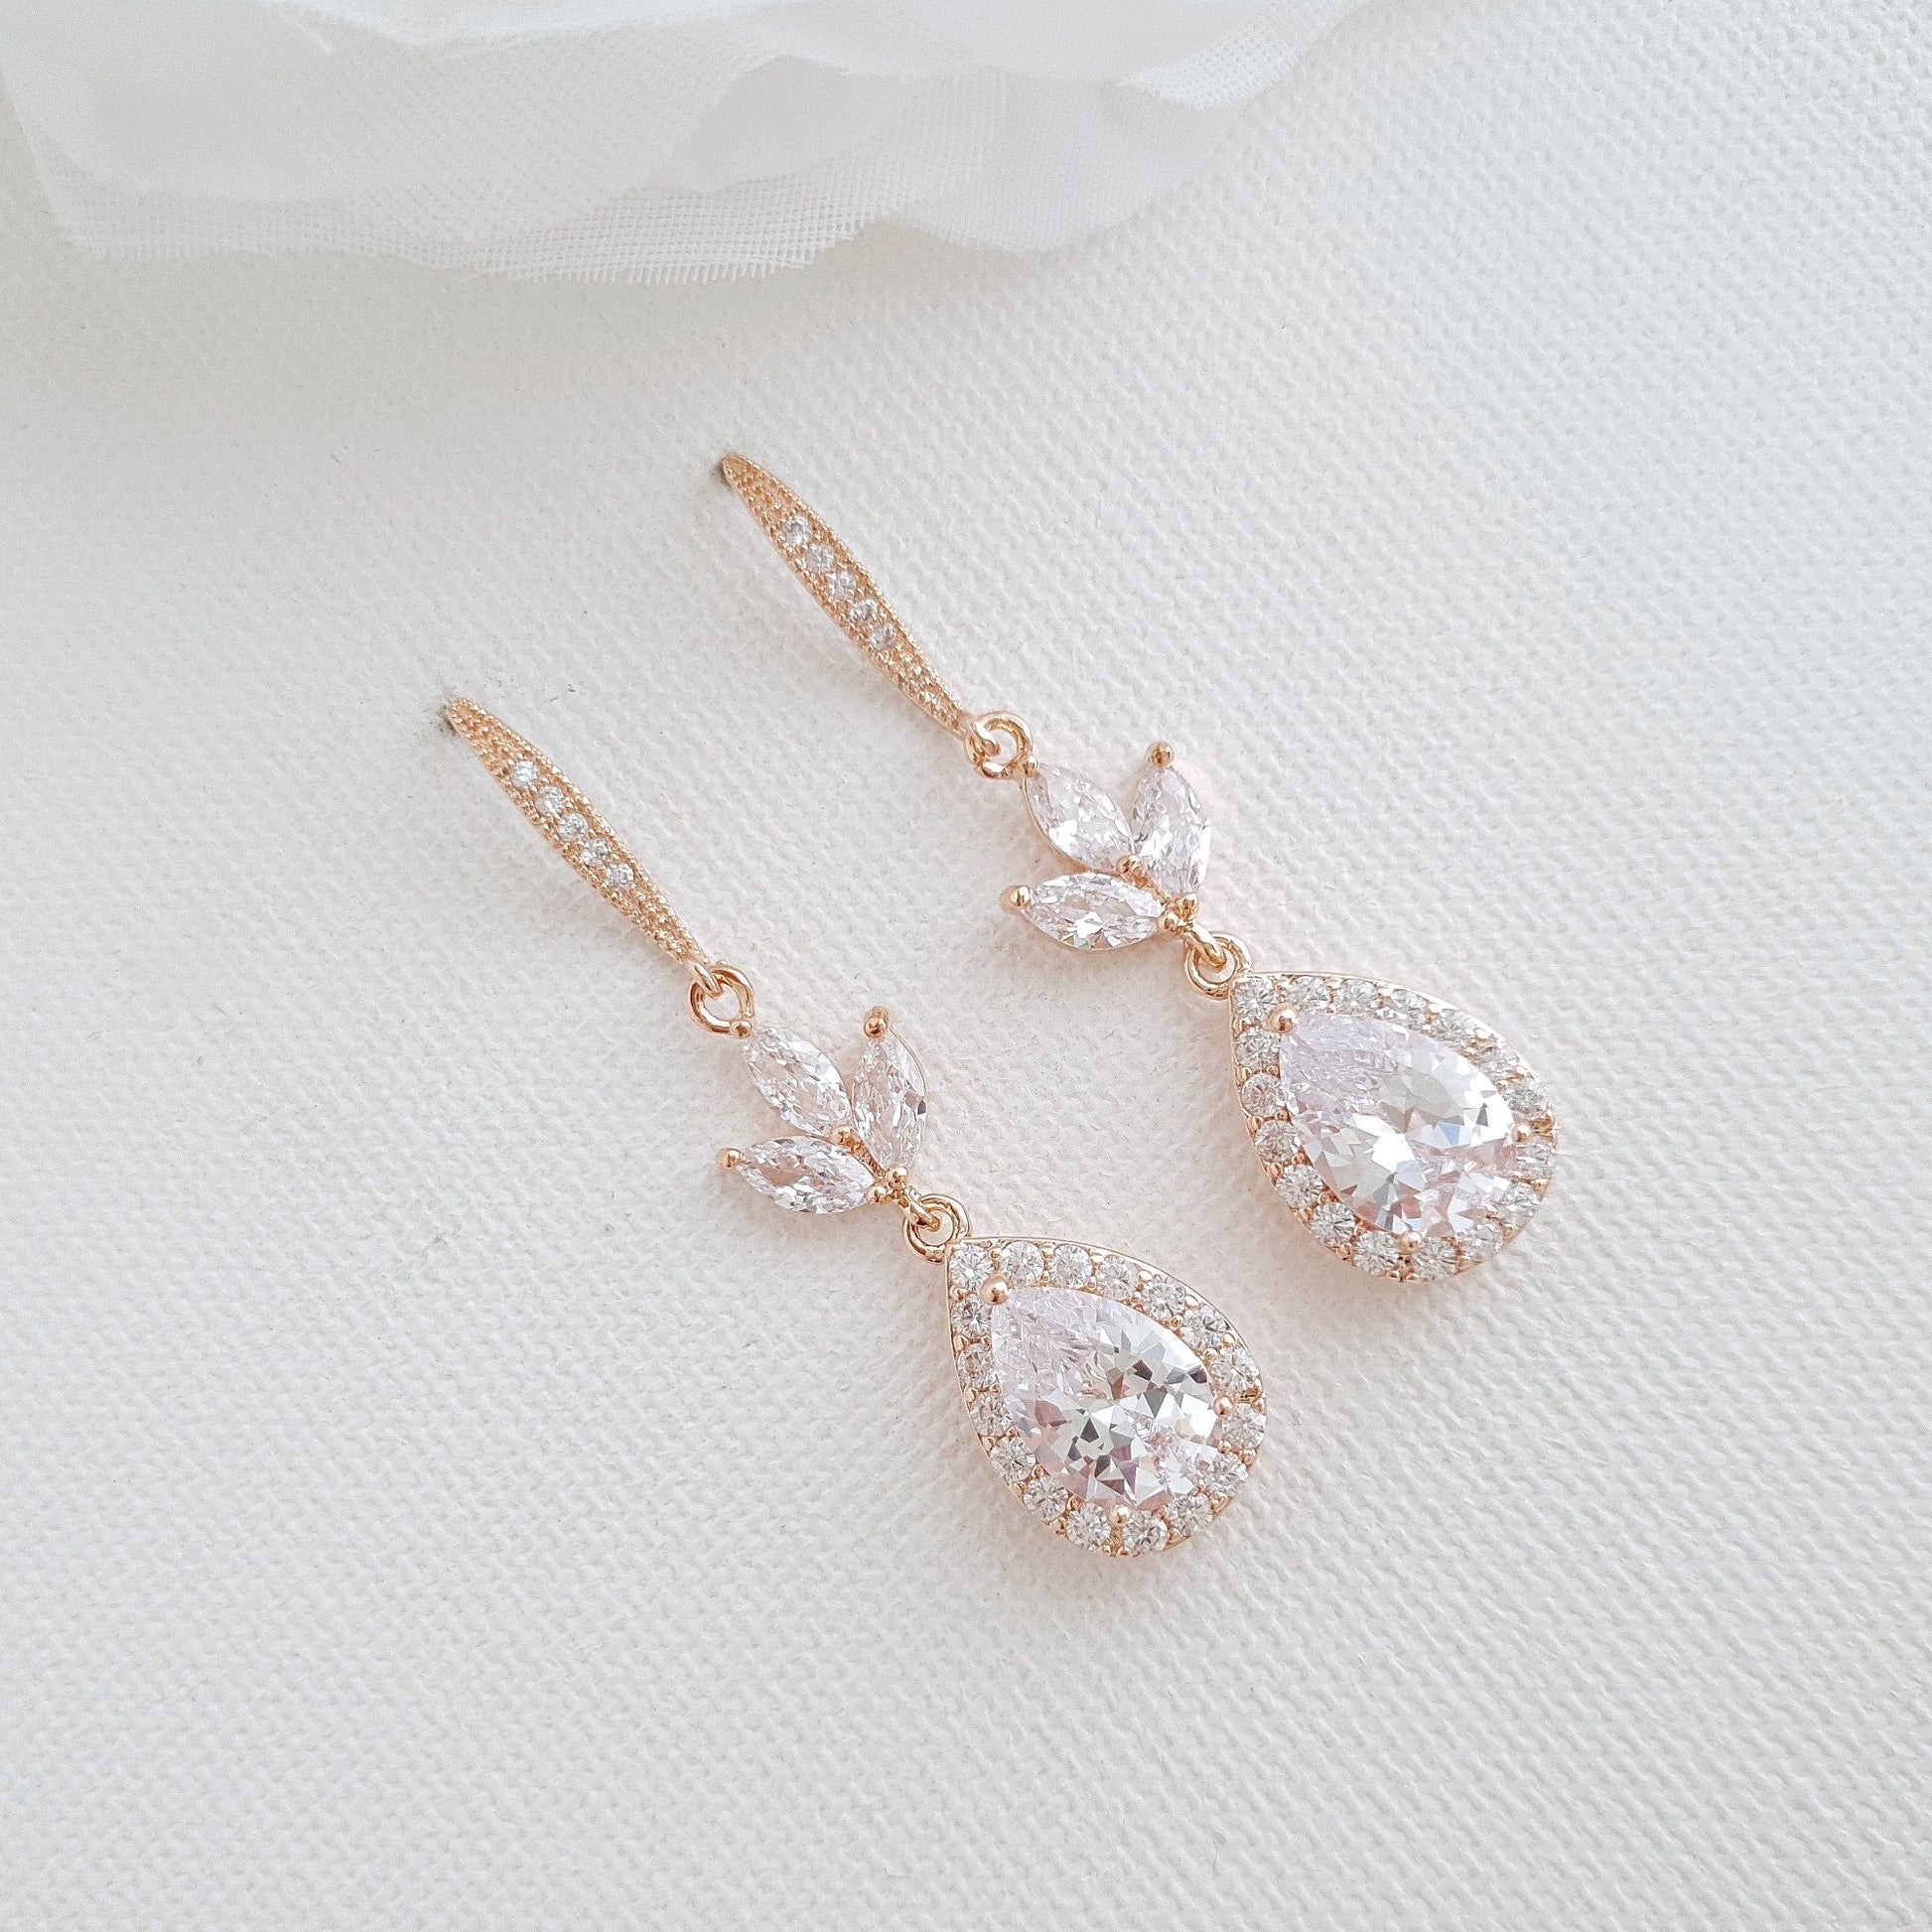 Silver Hook Earrings for Weddings & Brides With CZ Crystal Dangle